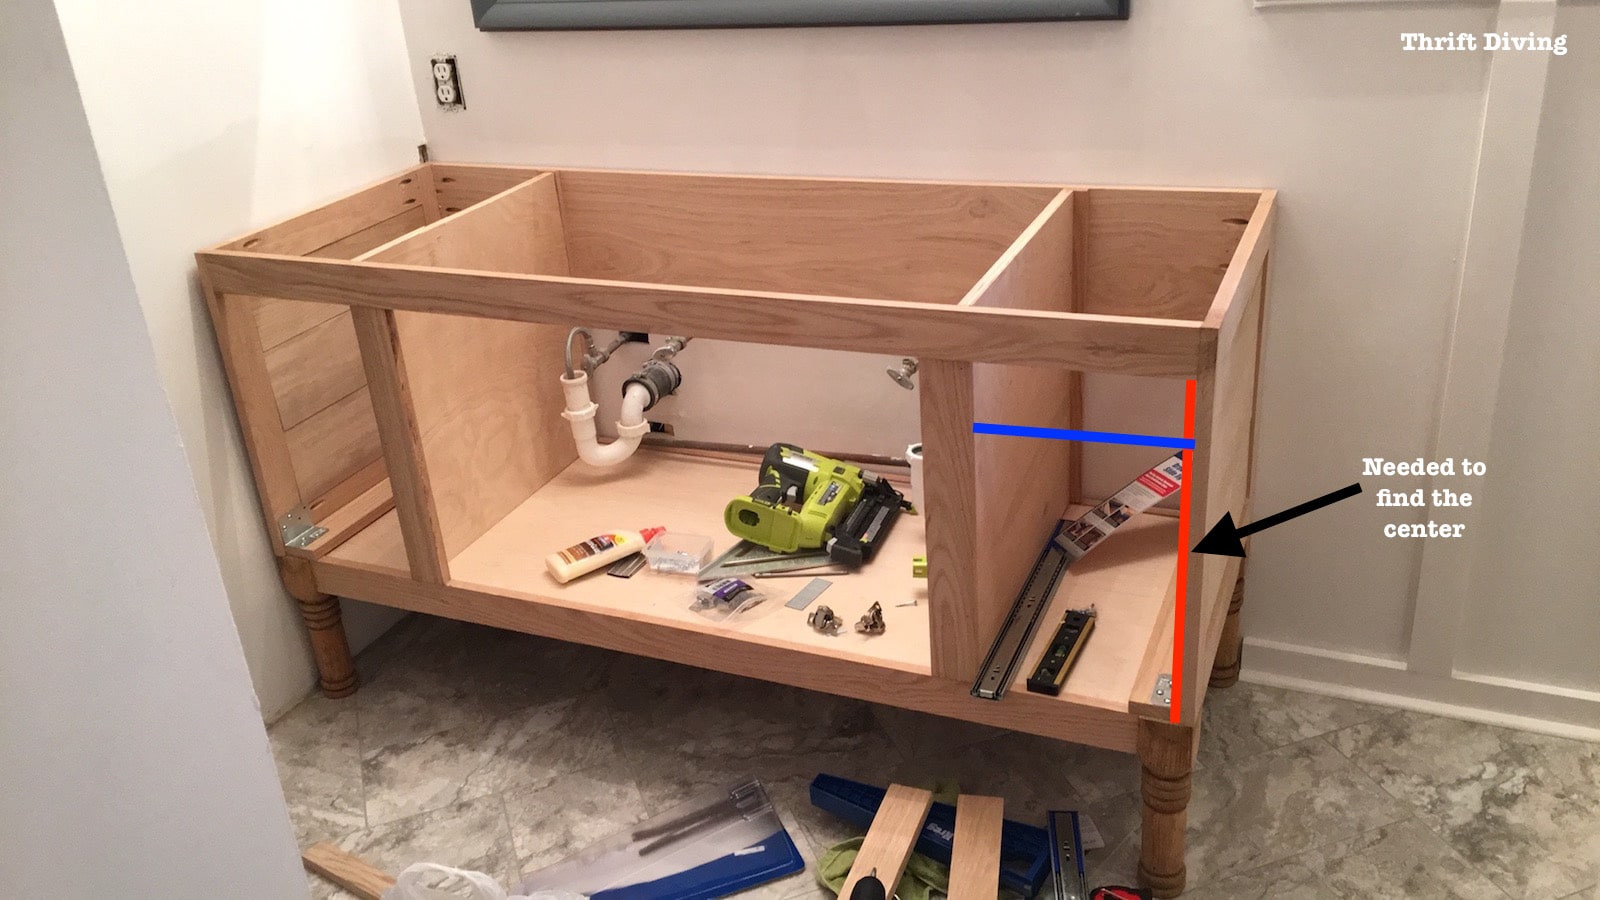 Best ideas about DIY Kitchen Cabinet Drawers
. Save or Pin Build a DIY Bathroom Vanity Part 4 Making the Drawers Now.